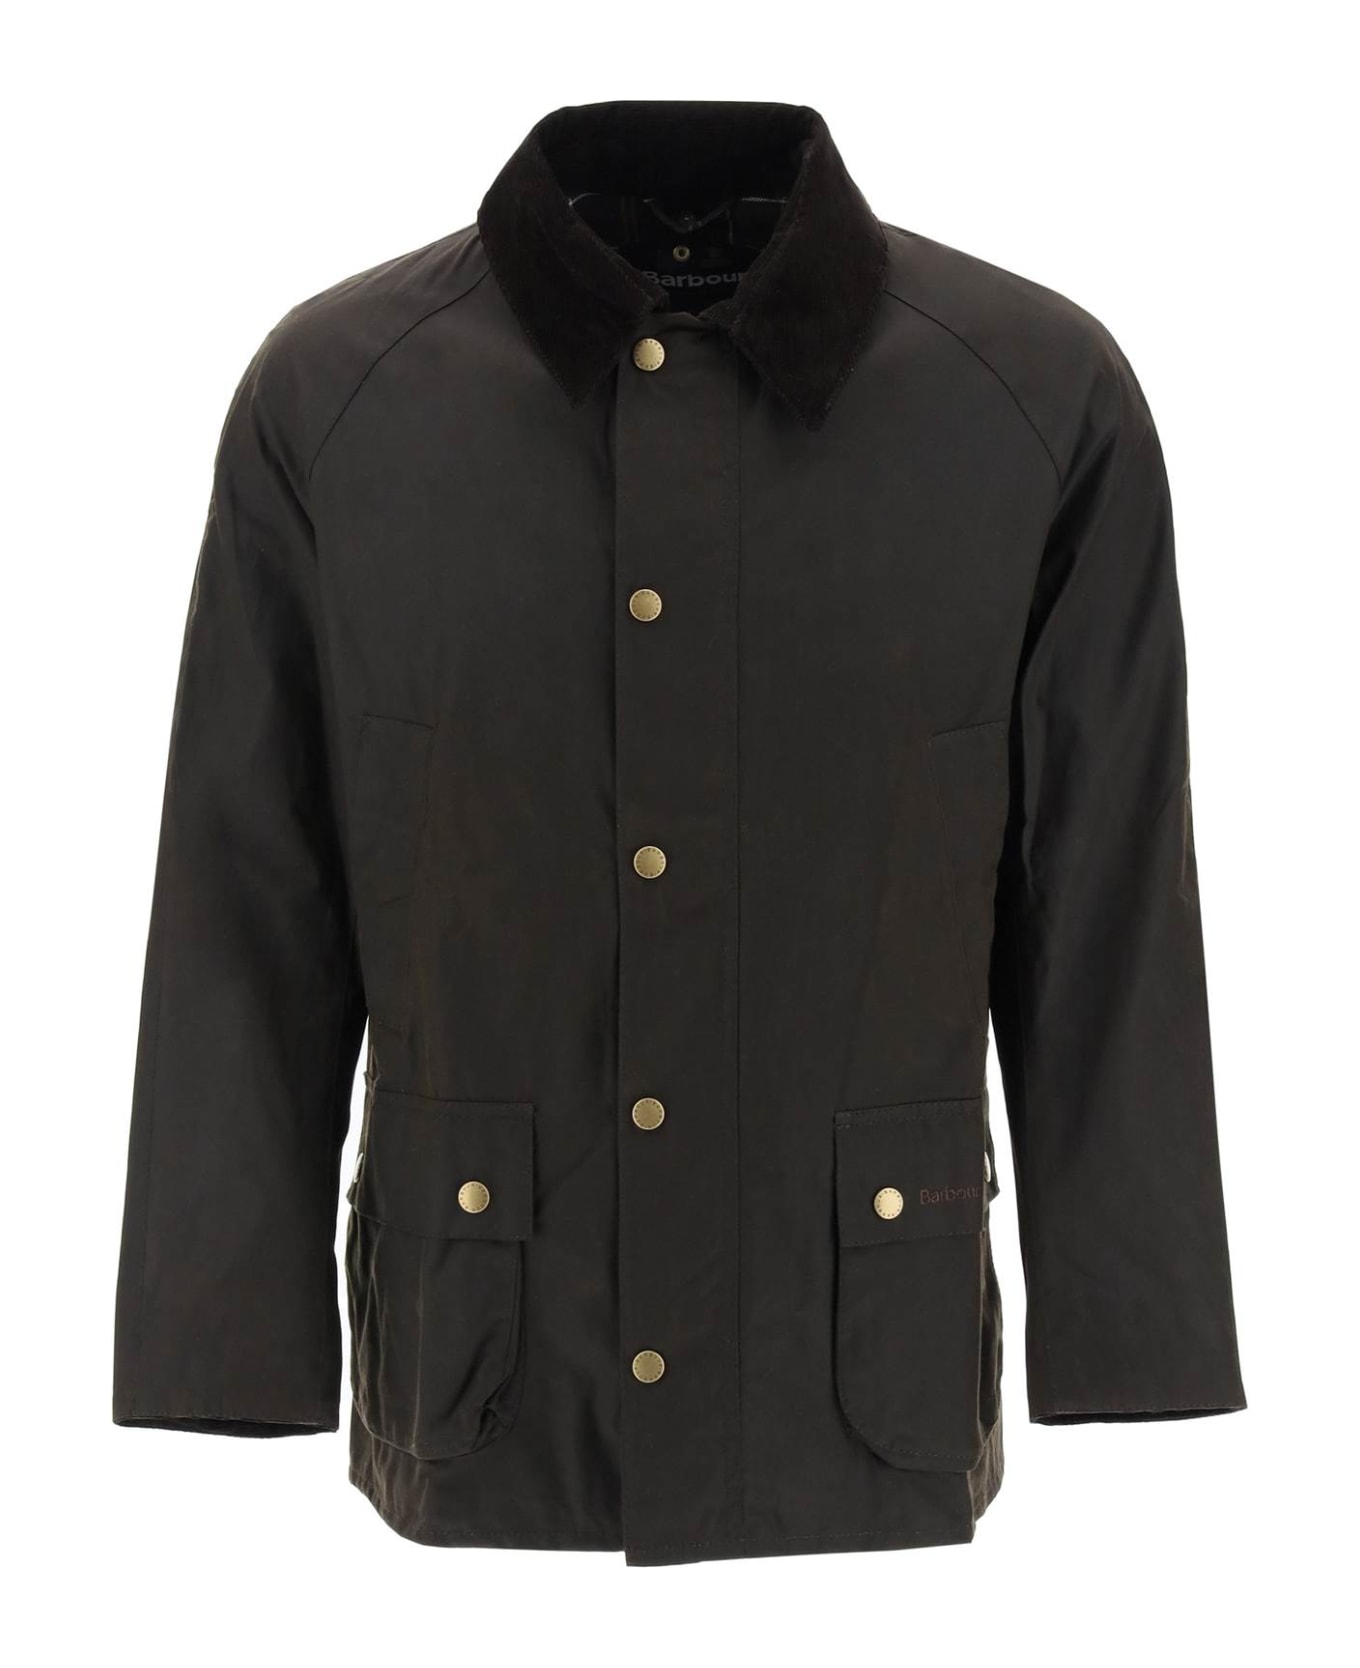 Barbour Ashby Waxed Jacket - OLIVE (Green)